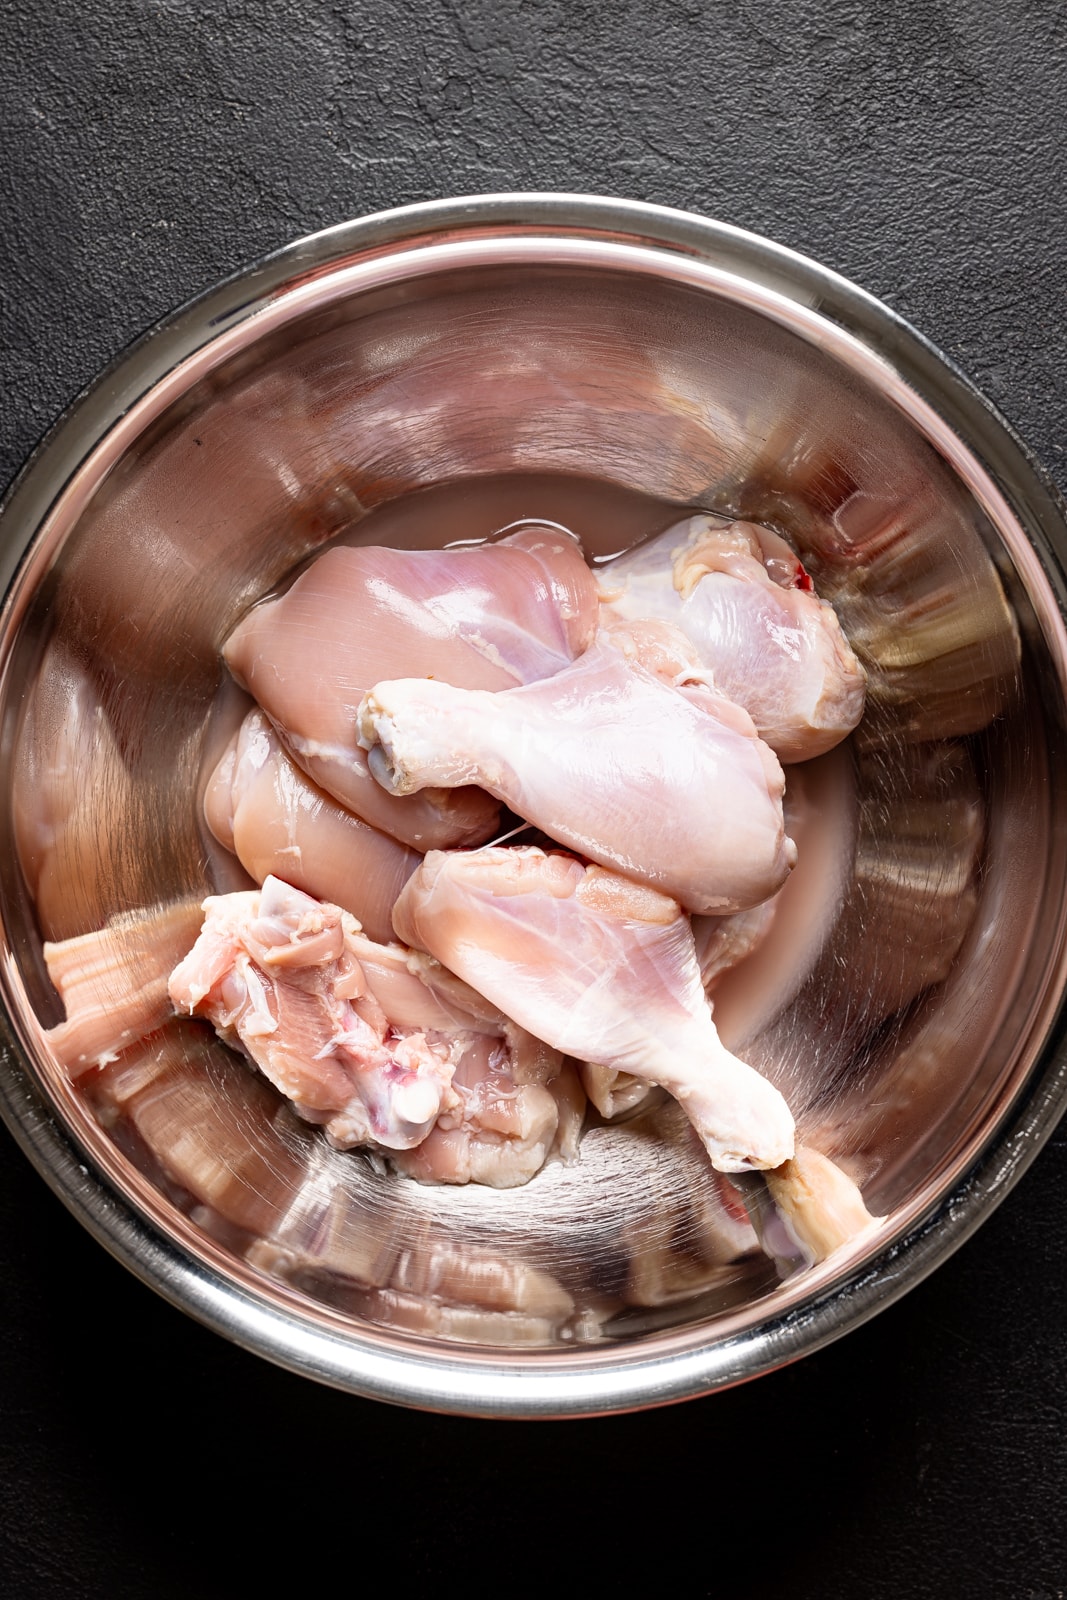 Uncooked chicken in a large silver bowl on a black table.